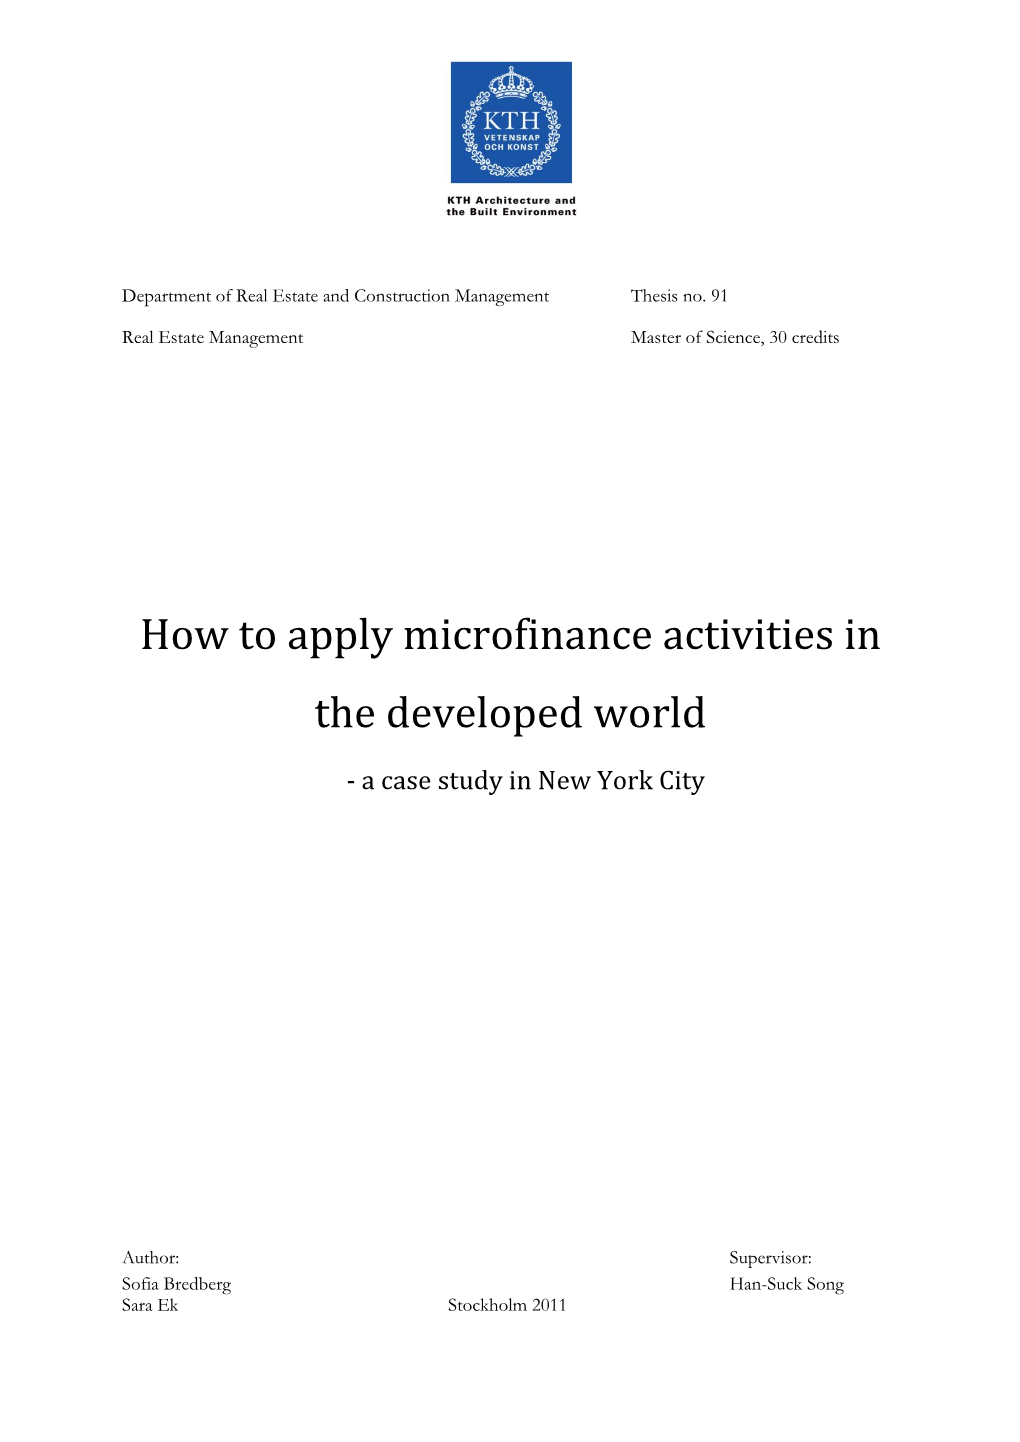 How to Apply Microfinance Activities in a Developed Country